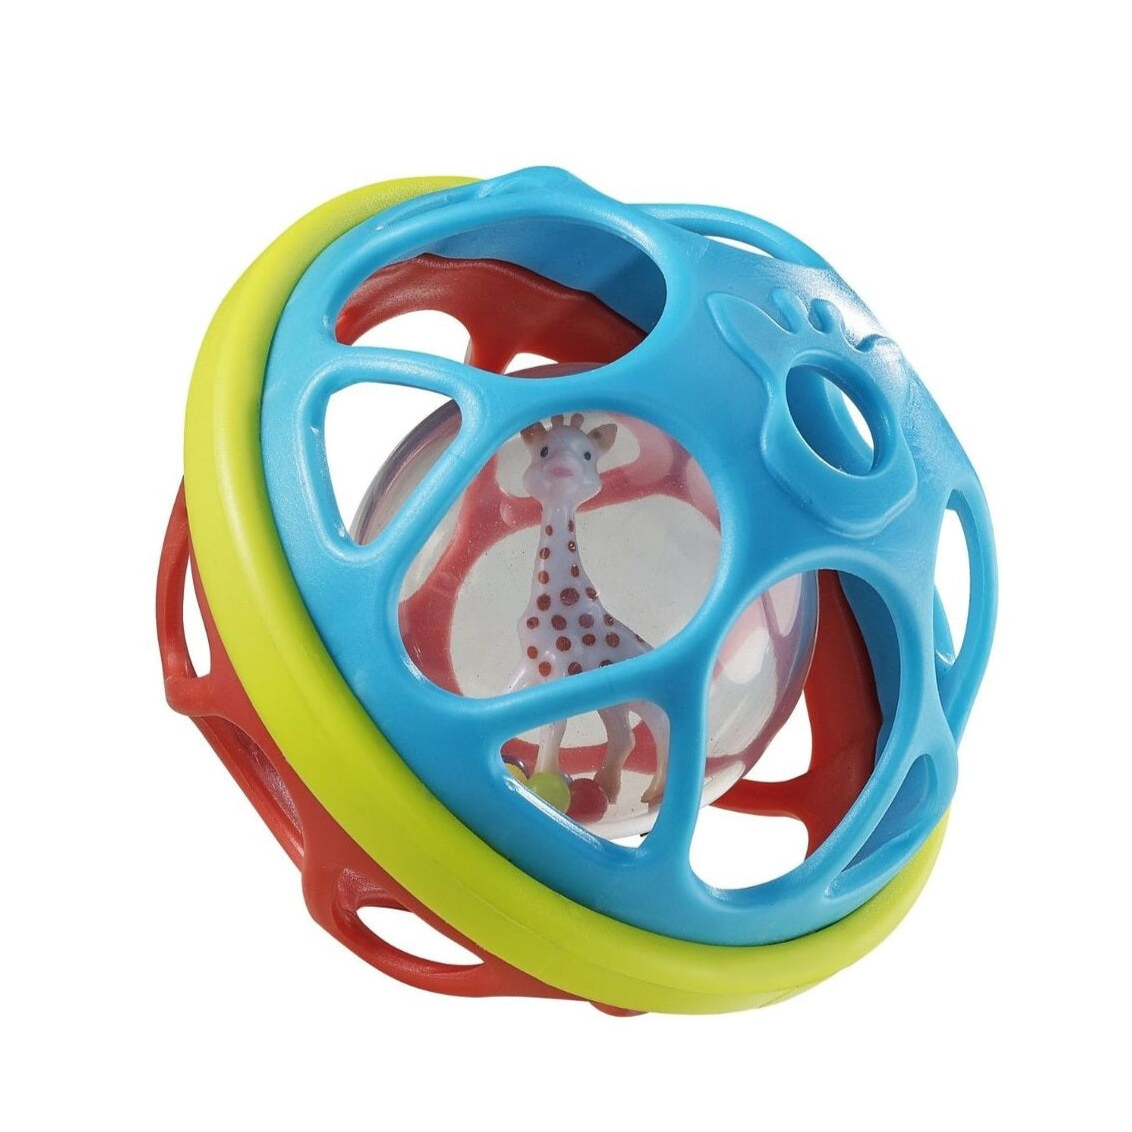 Sophie La Girafe - Fresh Touch Soft Ball Early Learning Toy